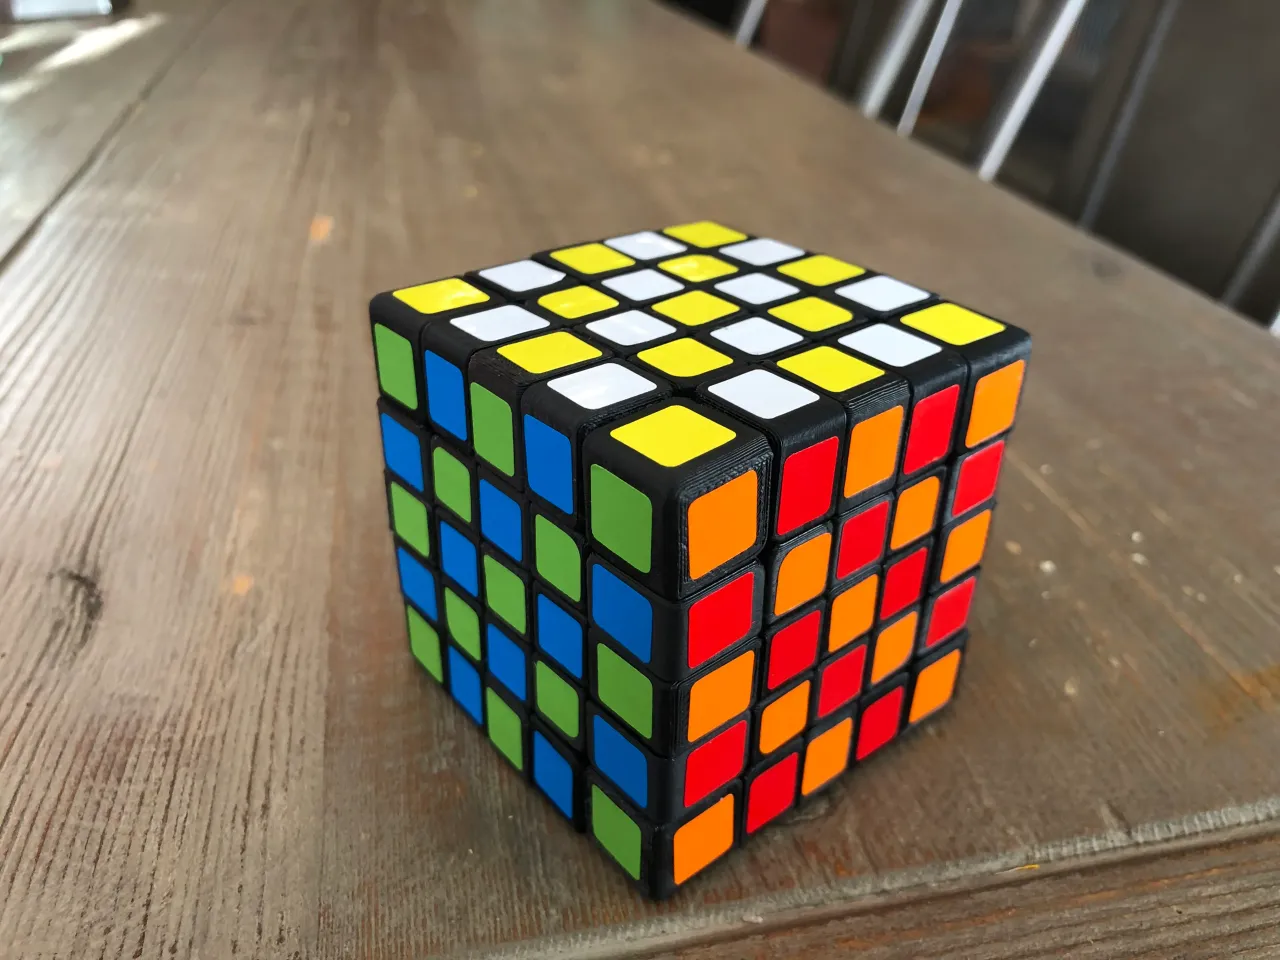 How To Solve 4 Square Rubik's Cube